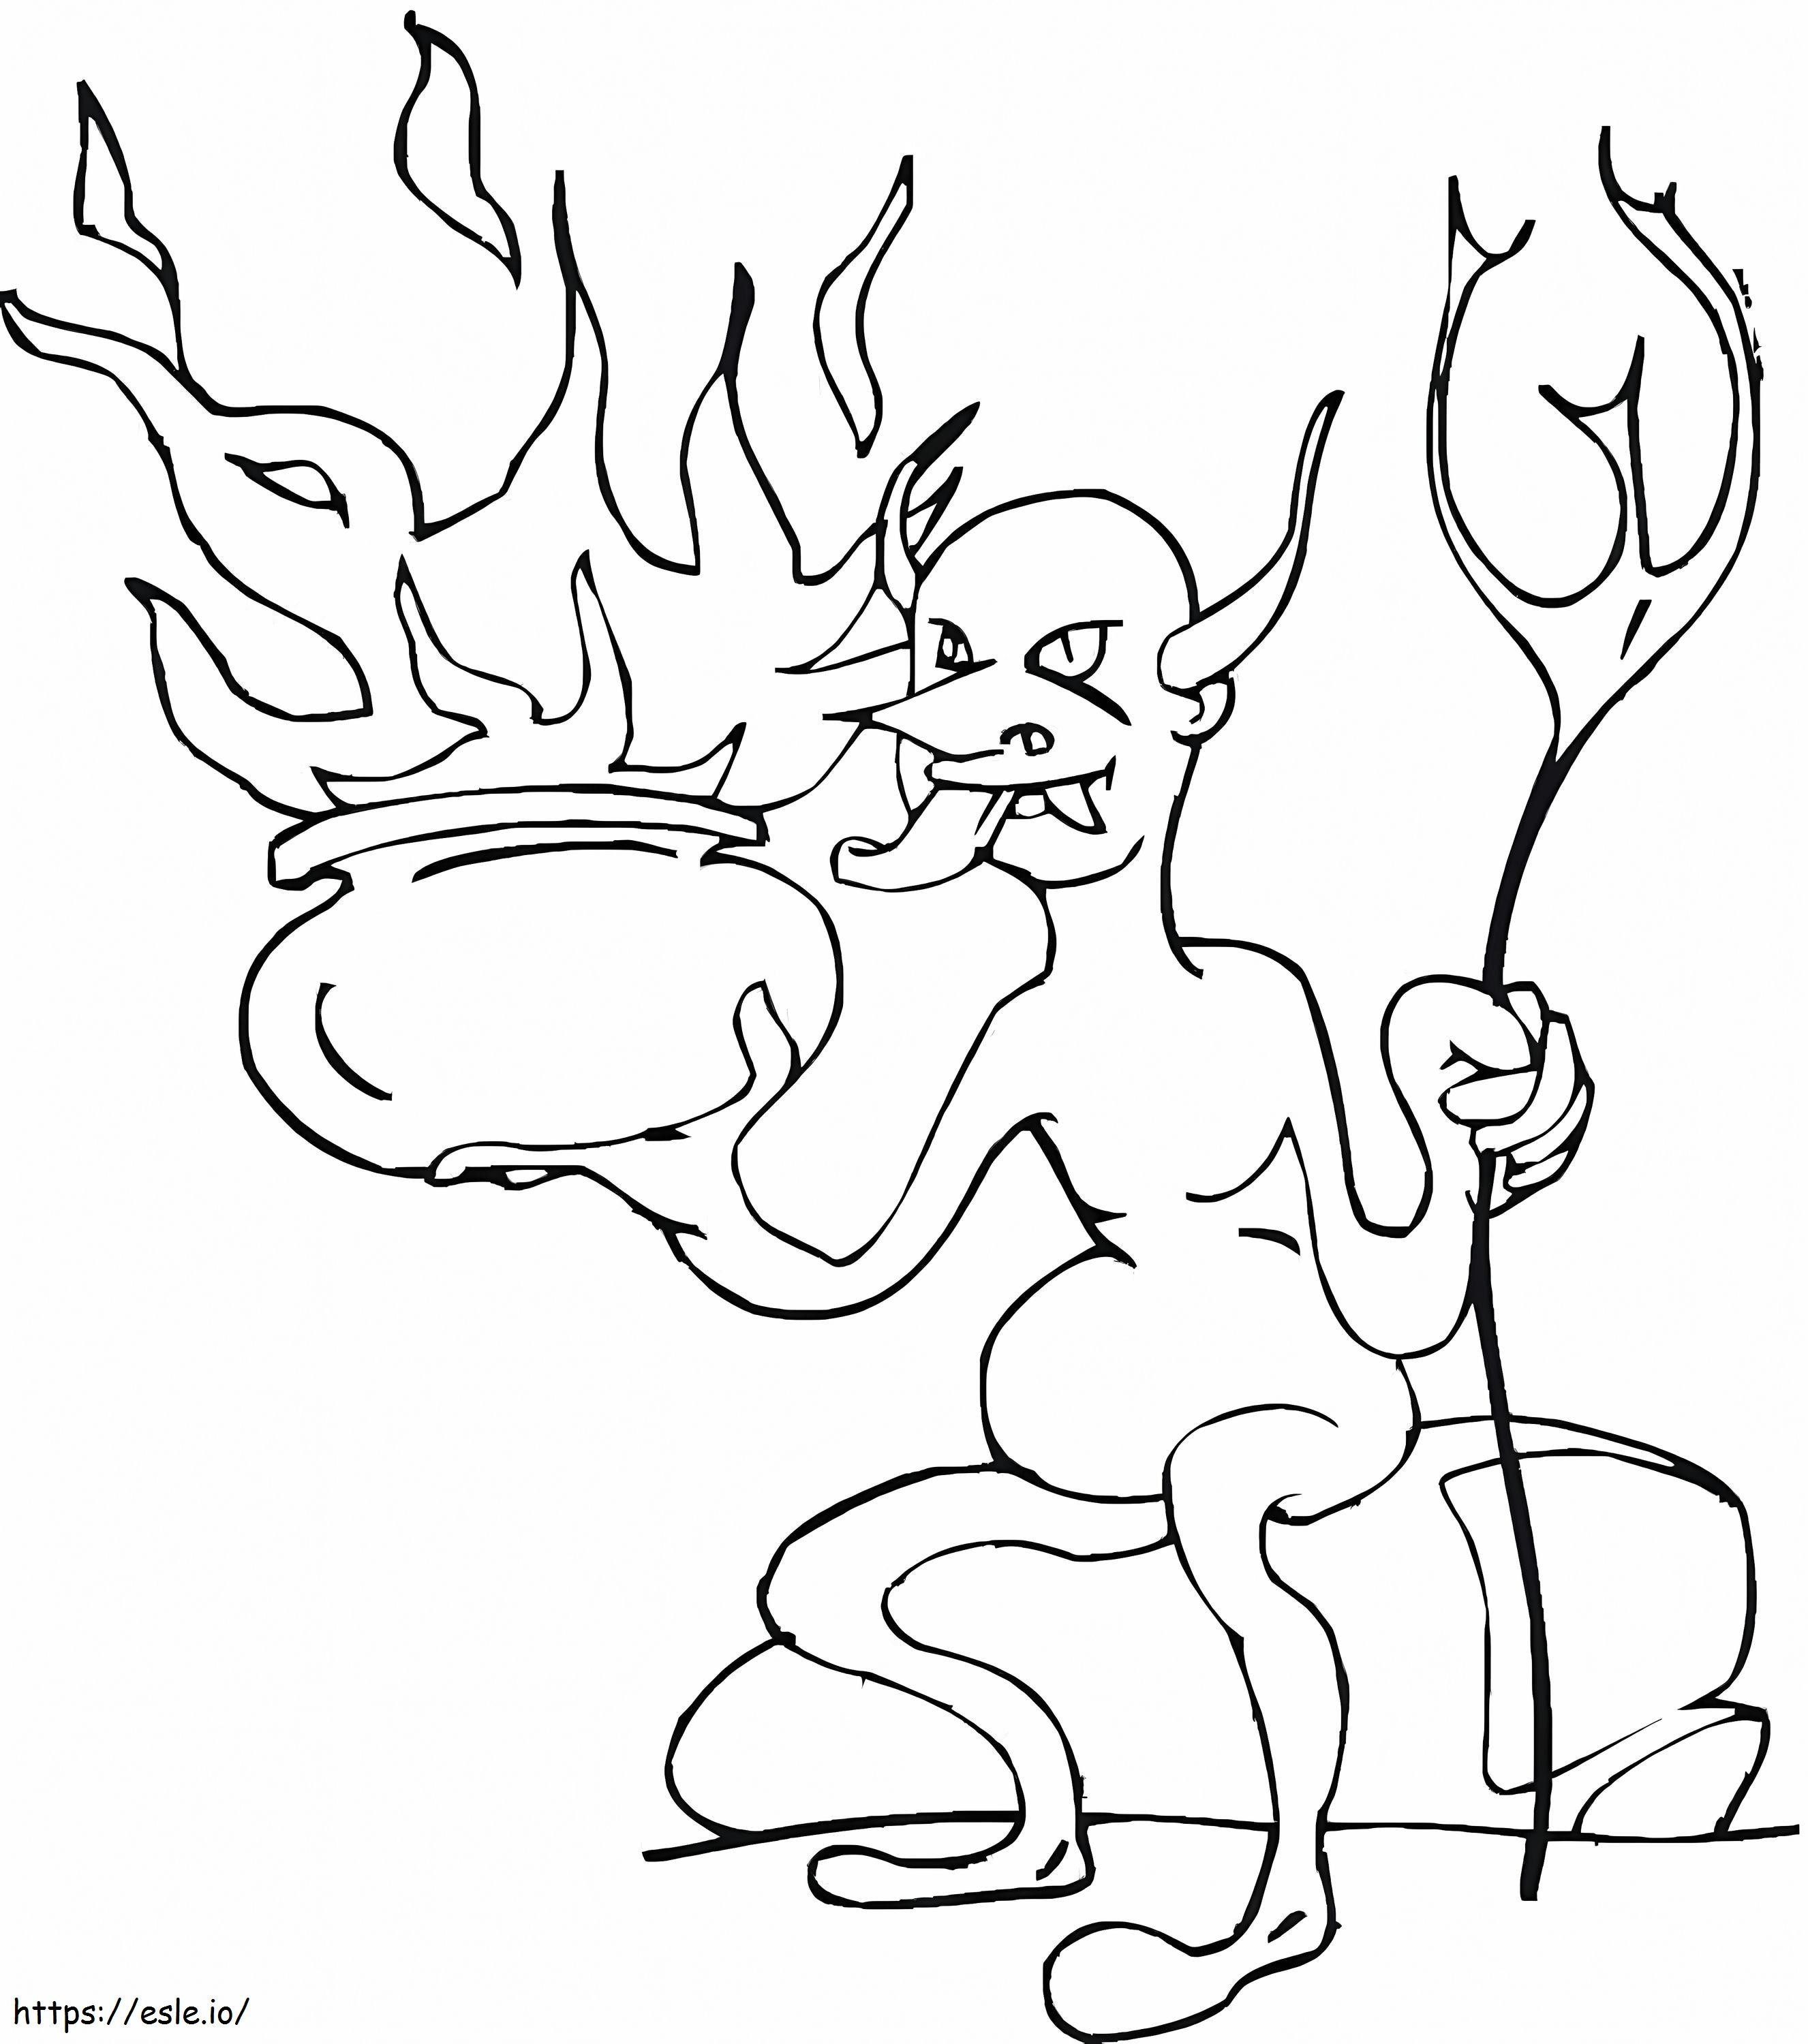 Scary Demon coloring page